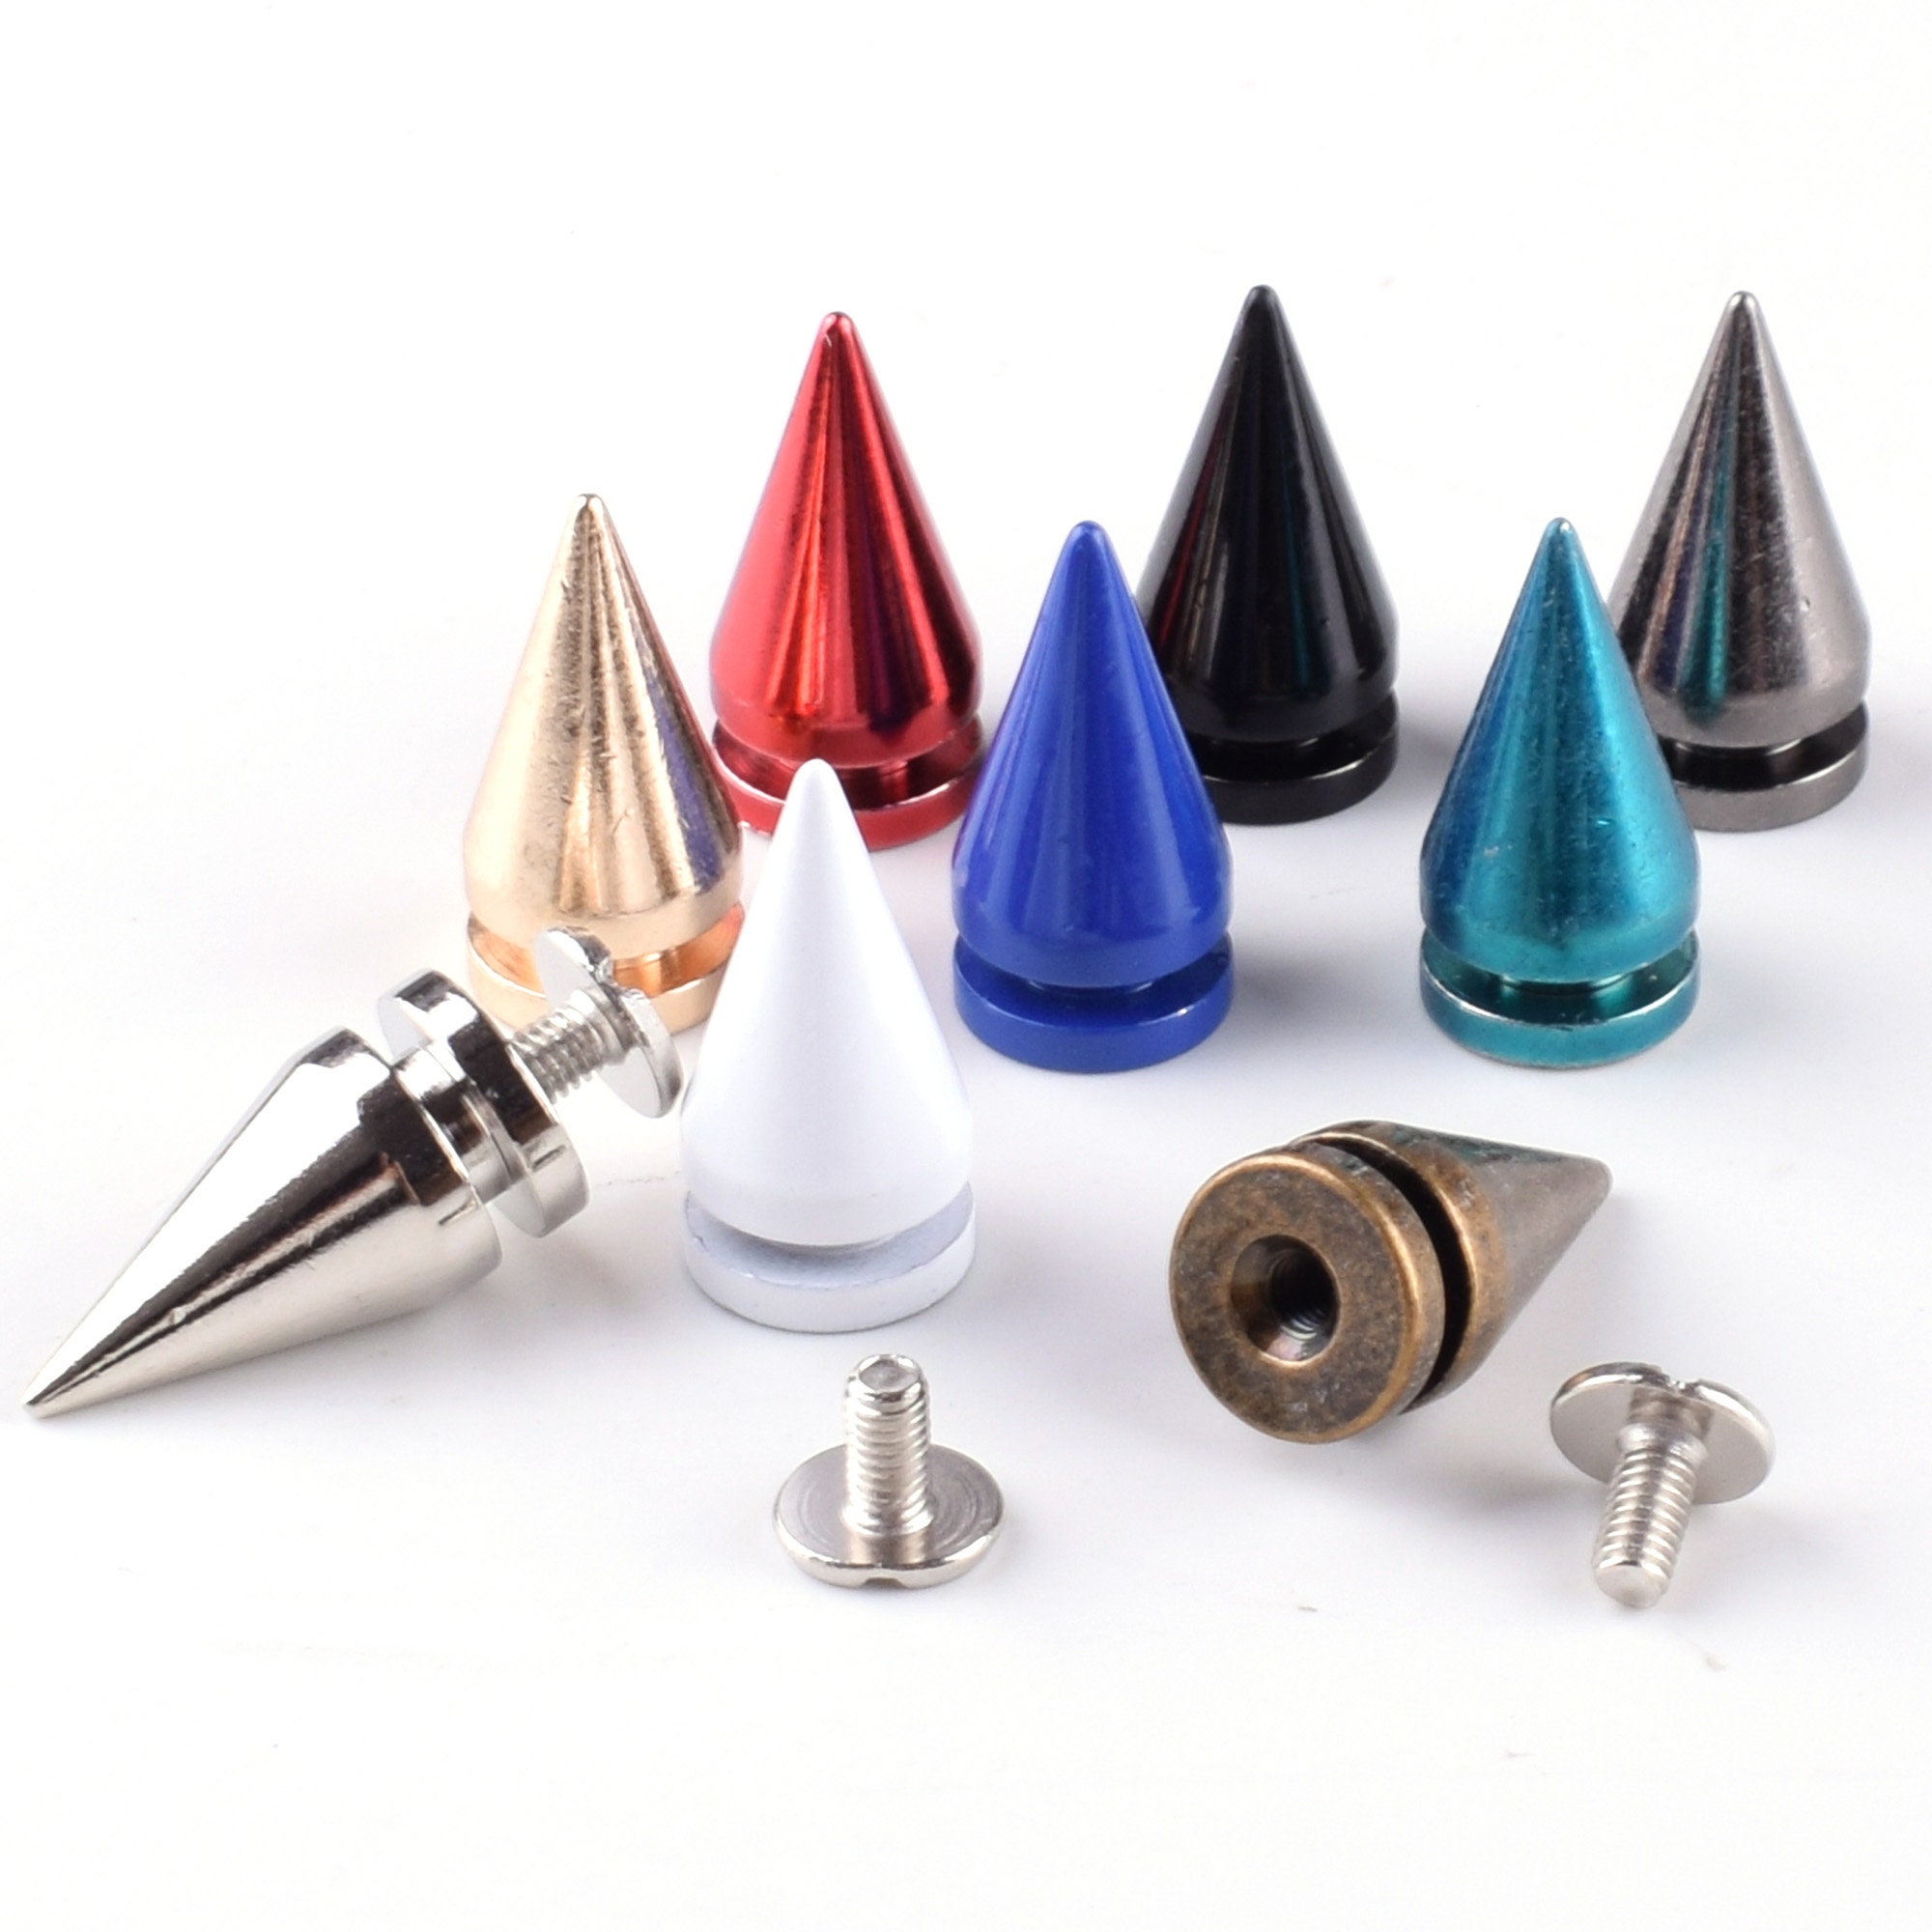 10sets Metal Punk Screw Rivets Studs DIY Crafts Leather Spikes Decor Nail  Buckles For Clothes Shoes Bag Belt Hat Accessories